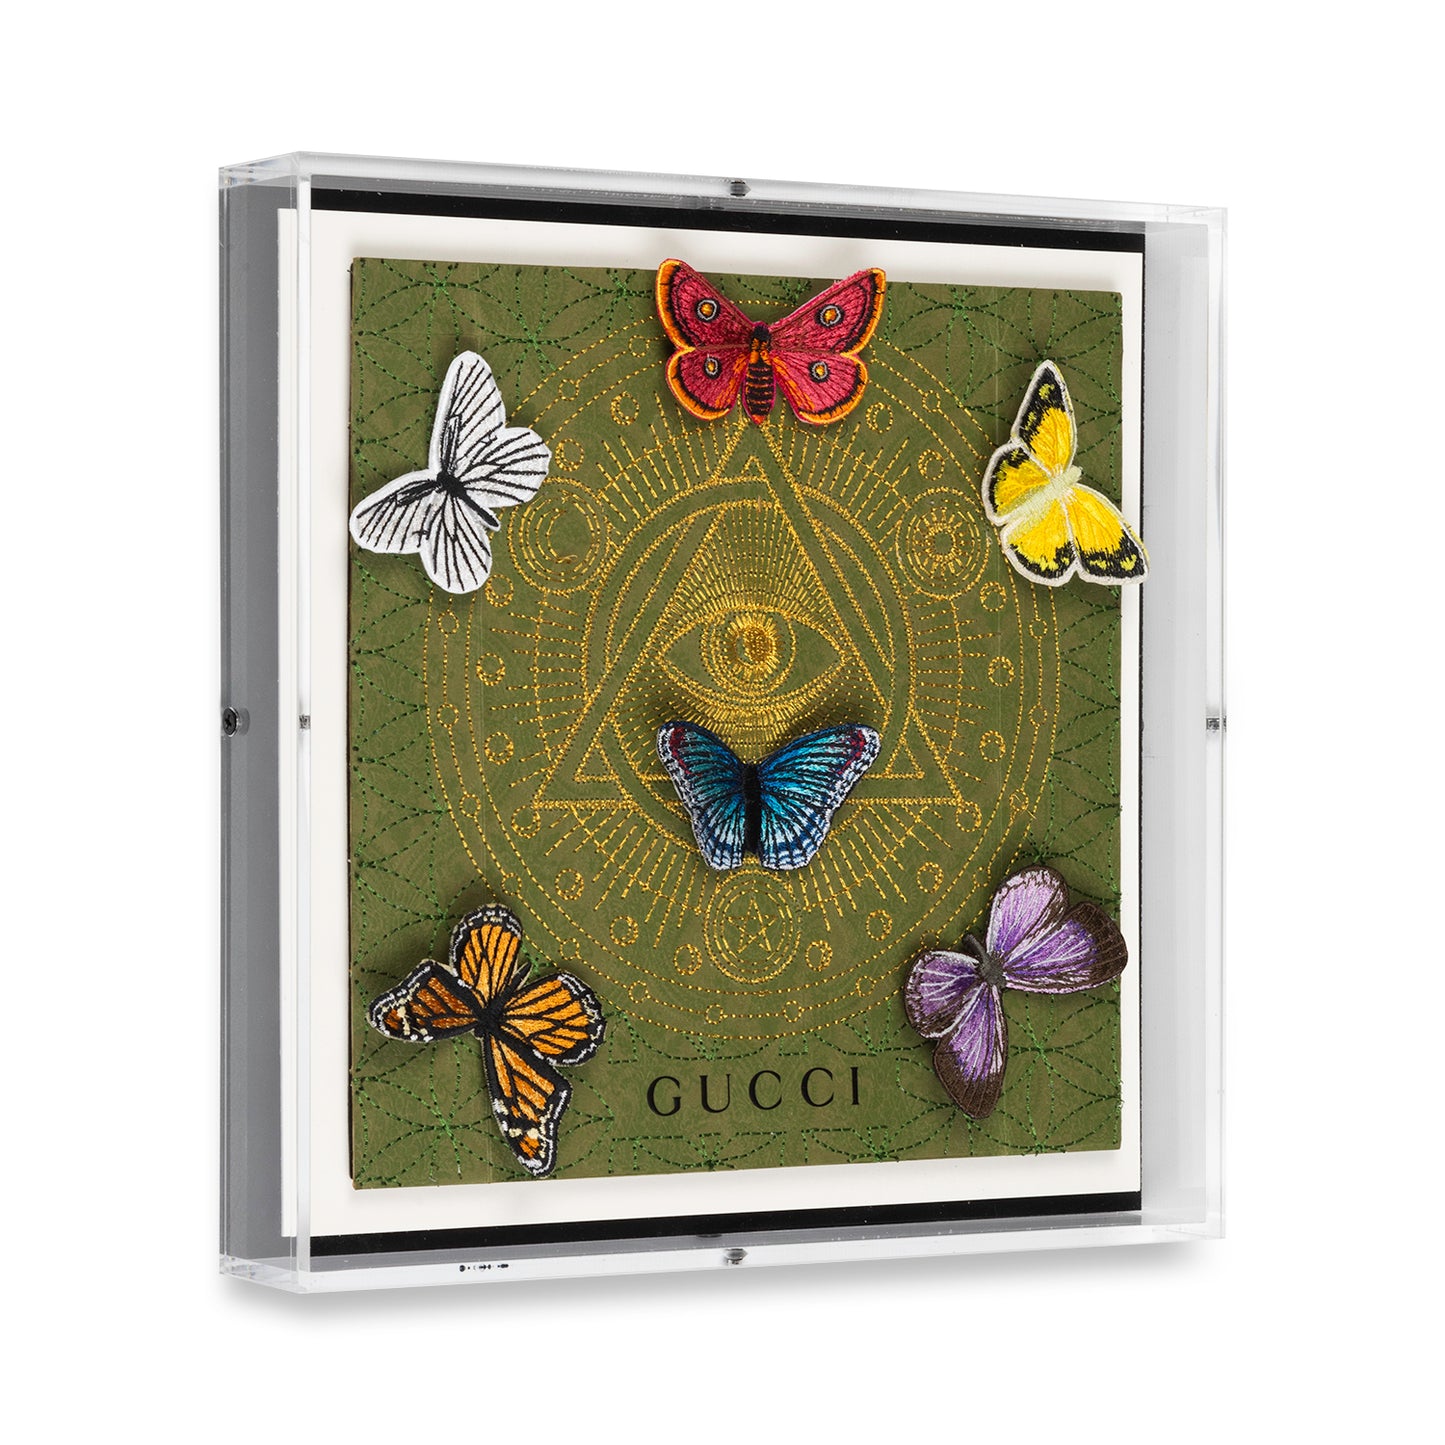 Gucci Eye of Providence by Stephen Wilson 12x12x2"